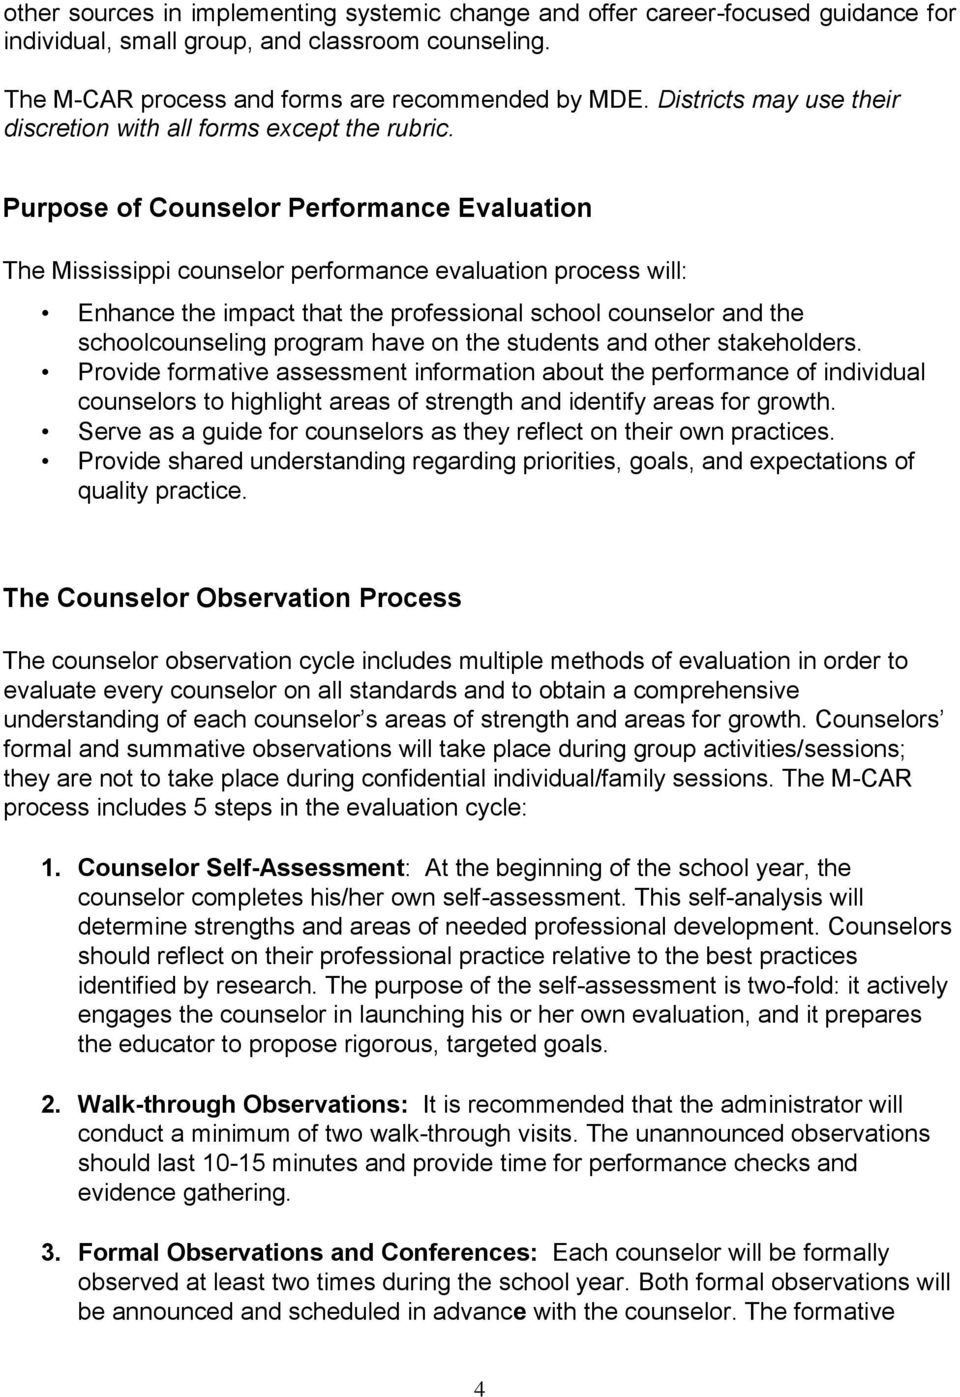 Purpose of Counselor Performance Evaluation The Mississippi counselor performance evaluation process will: Enhance the impact that the professional school counselor and the schoolcounseling program